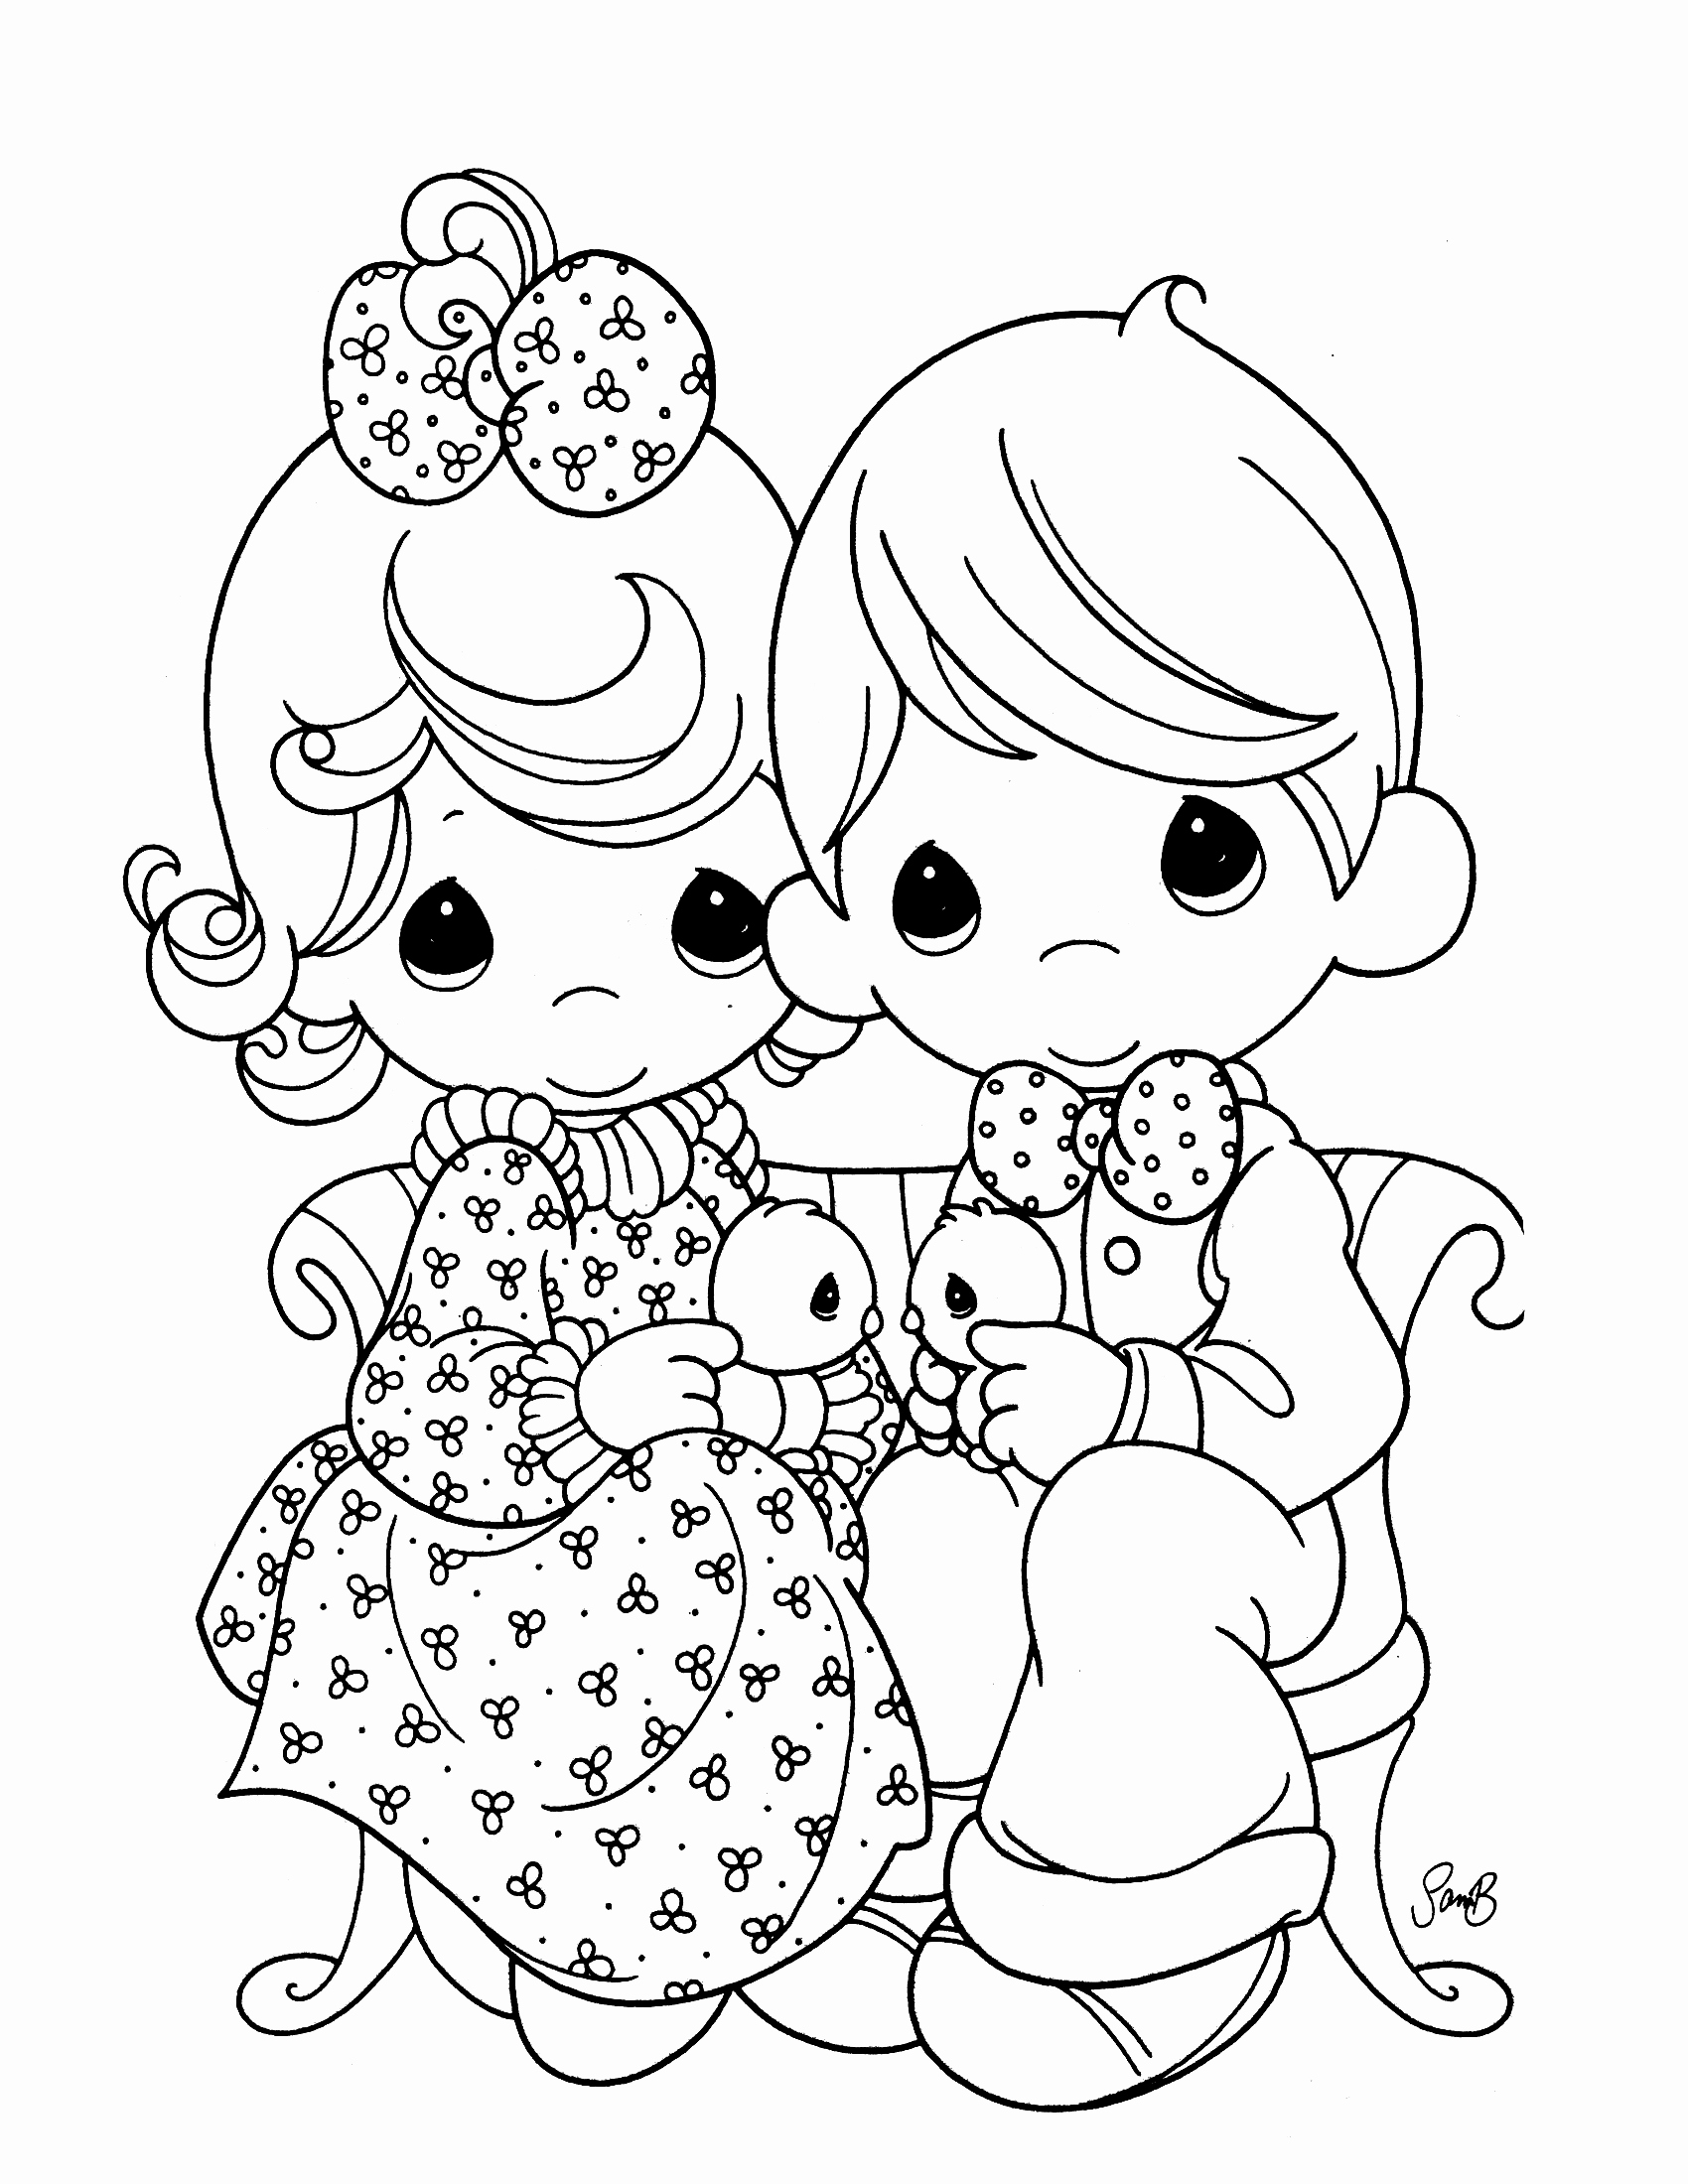 printable-precious-moments-coloring-pages-customize-and-print